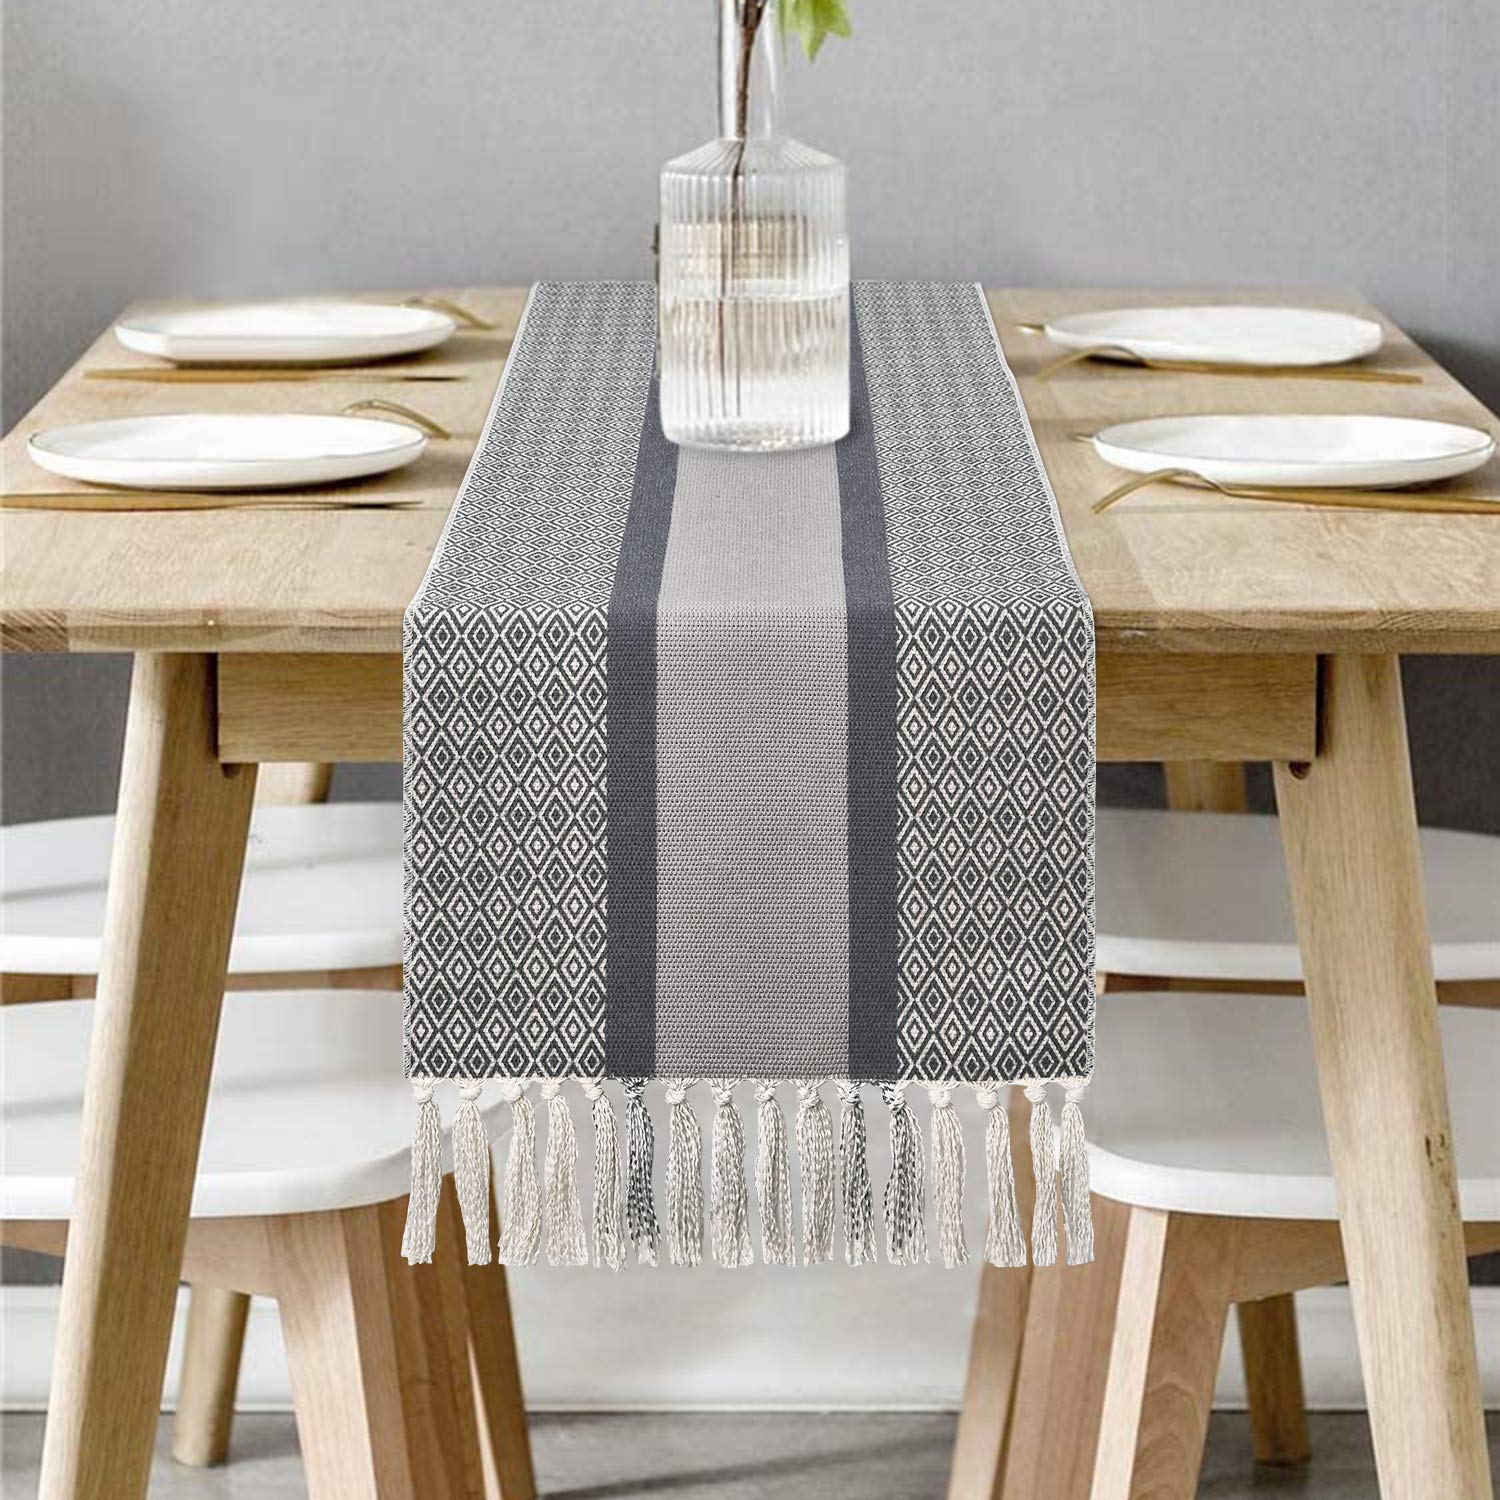 Yugarlibi Dark Grey Table Runner, Geometric Striped Heatproof Table Runner, Non-Slip Table Cloth for Dining Room Party Banquet Polyester 70x14 Inches (180x35cm)